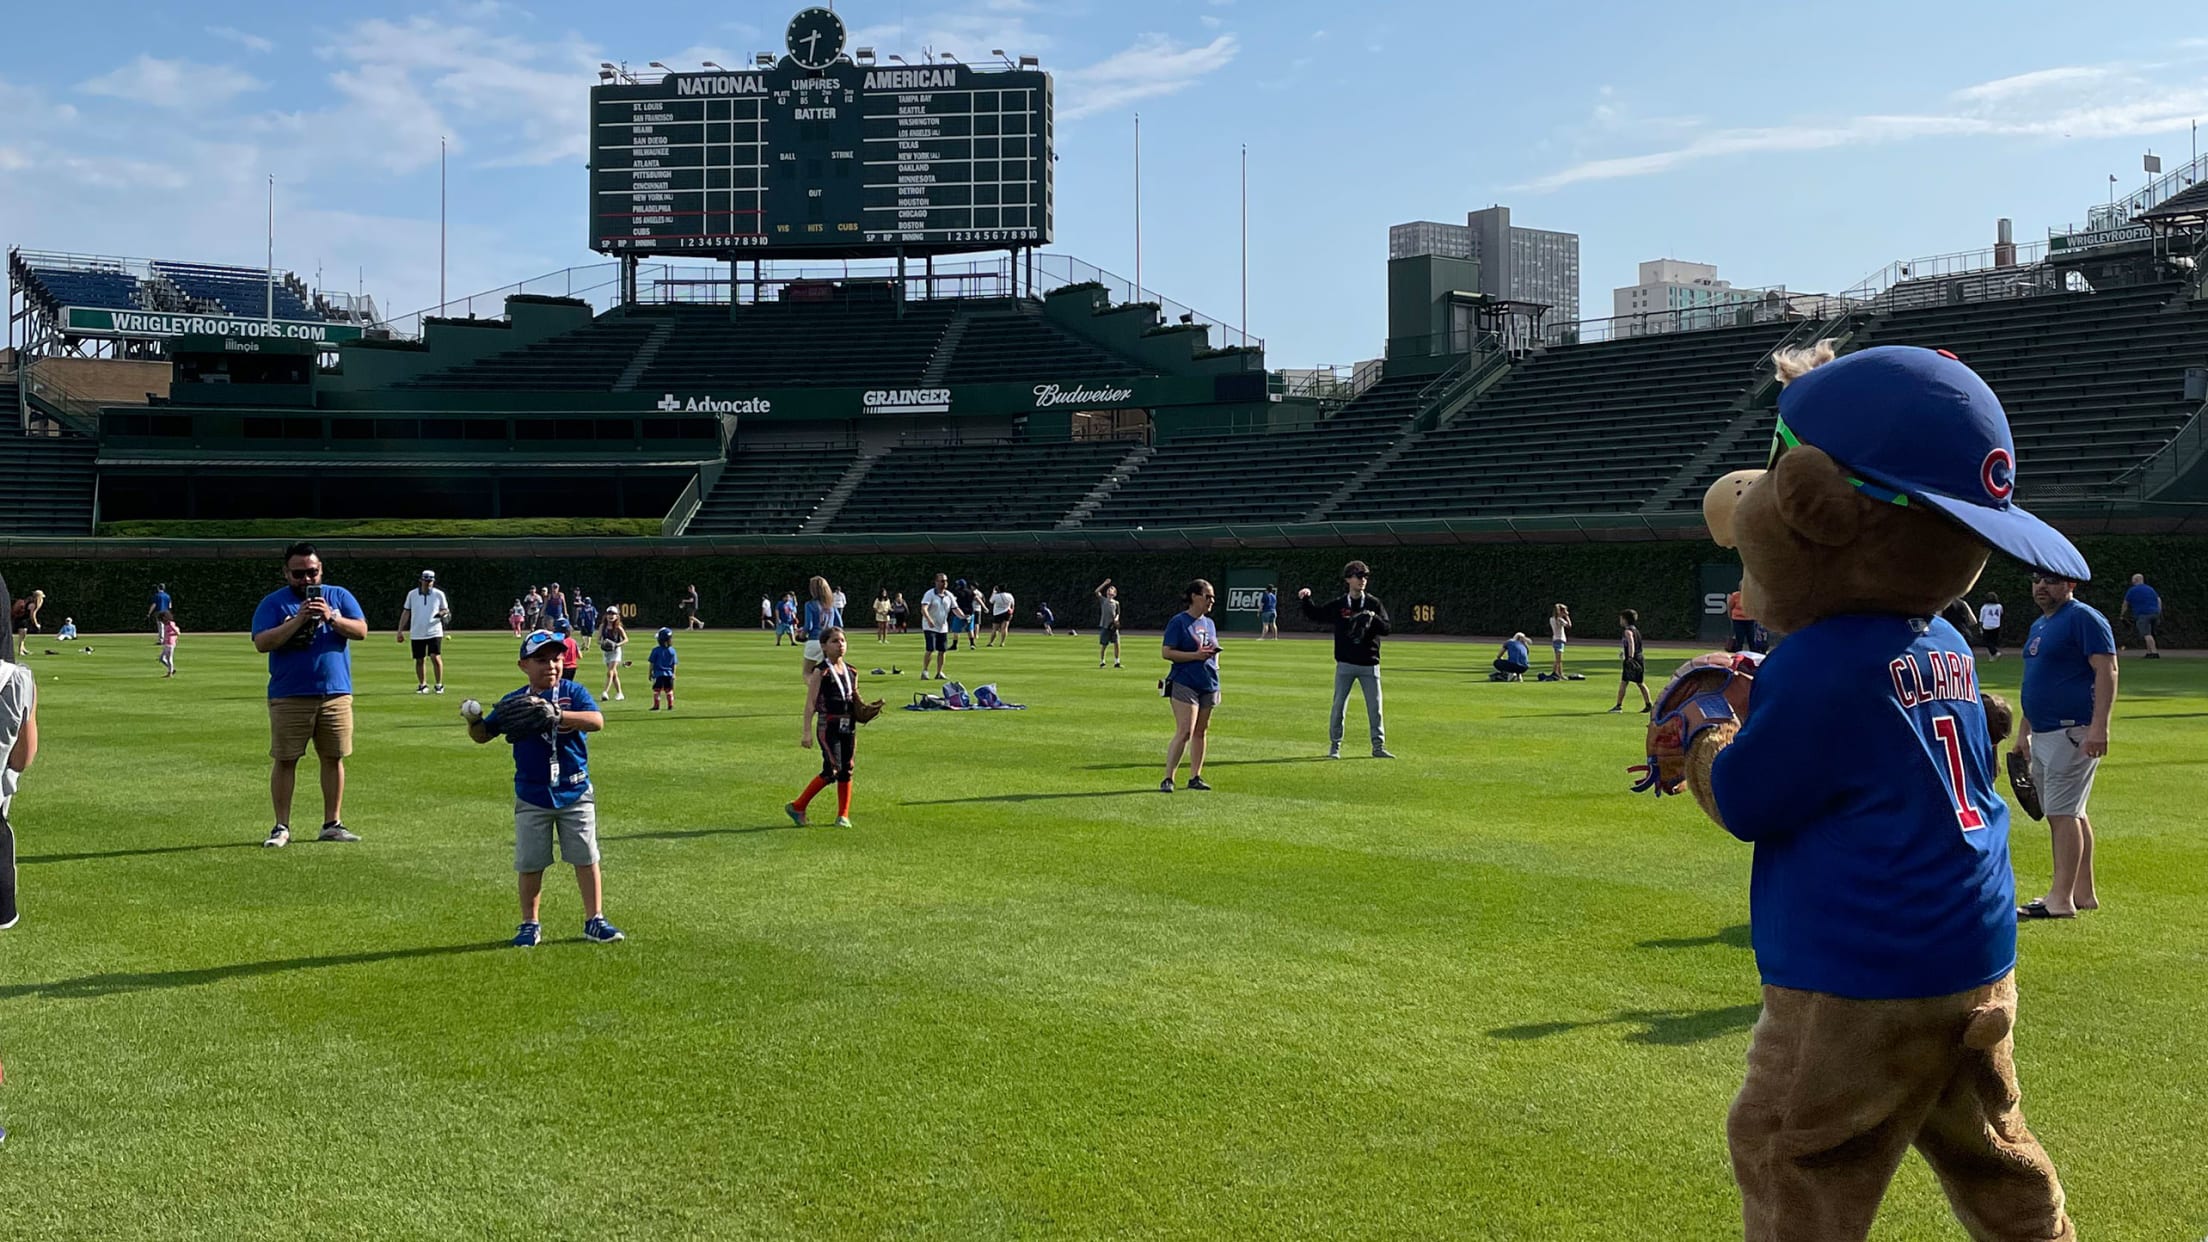 A first-timer's guide to Cubs games - Chicago Parent